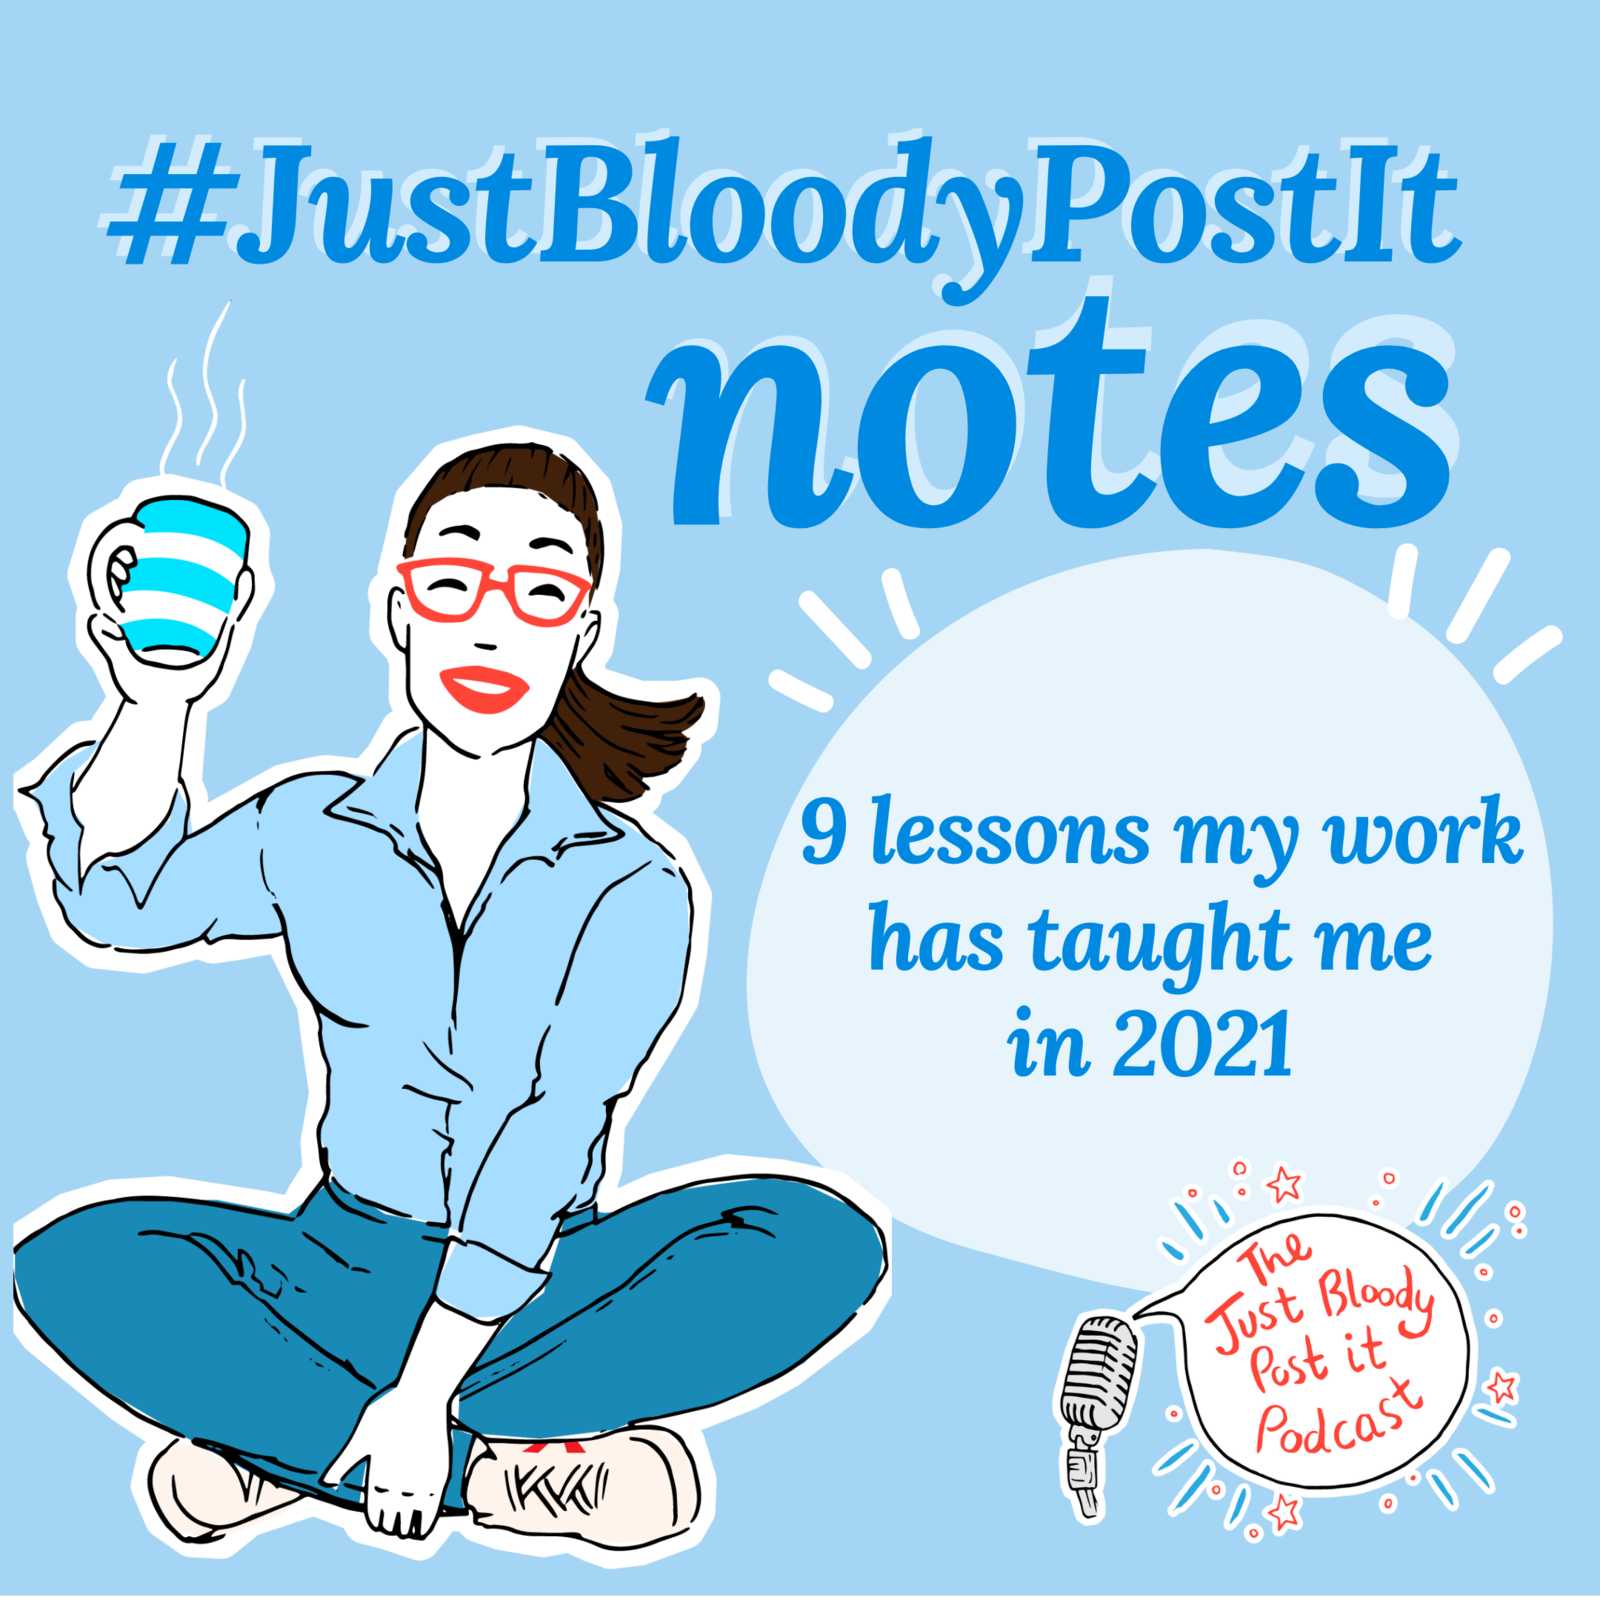 S2 Ep38: #JustBloodyPostIt note: 9 lessons work’s taught me in 2021